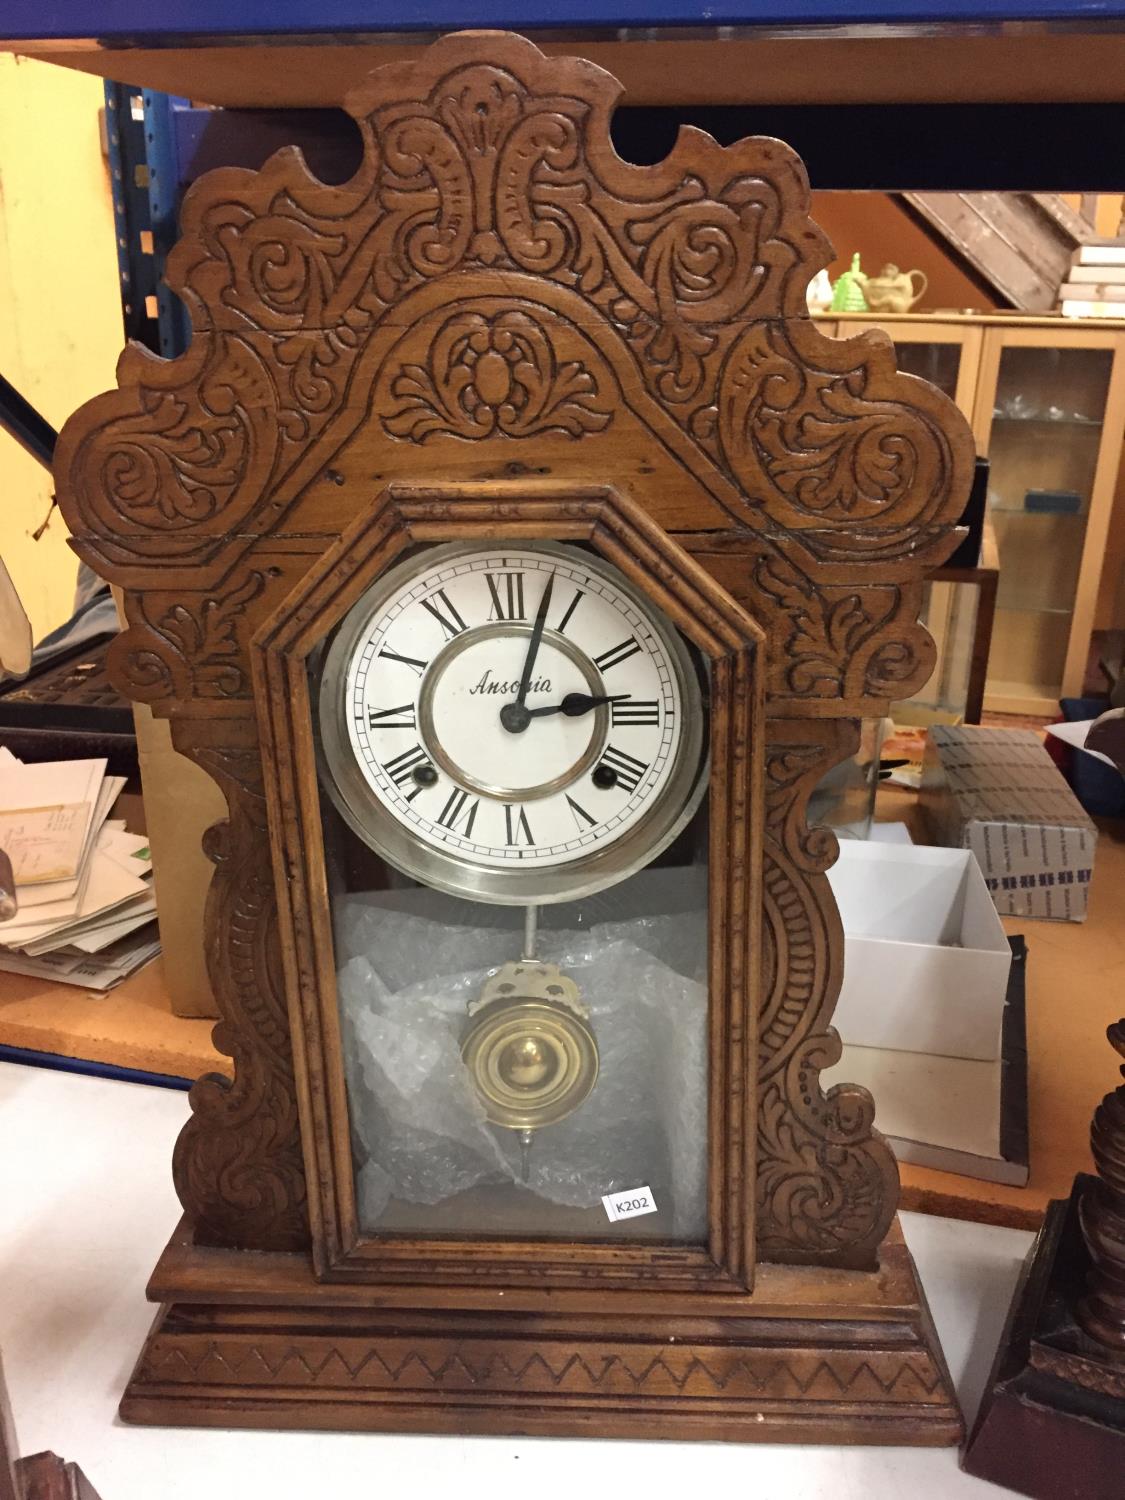 A VINTAGE AMERICAN GOTHIC STYLE CLOCK IN A WOODEN AND GLASS CASE WITH A BUTTERFLY PATTERN ON THE - Image 3 of 8